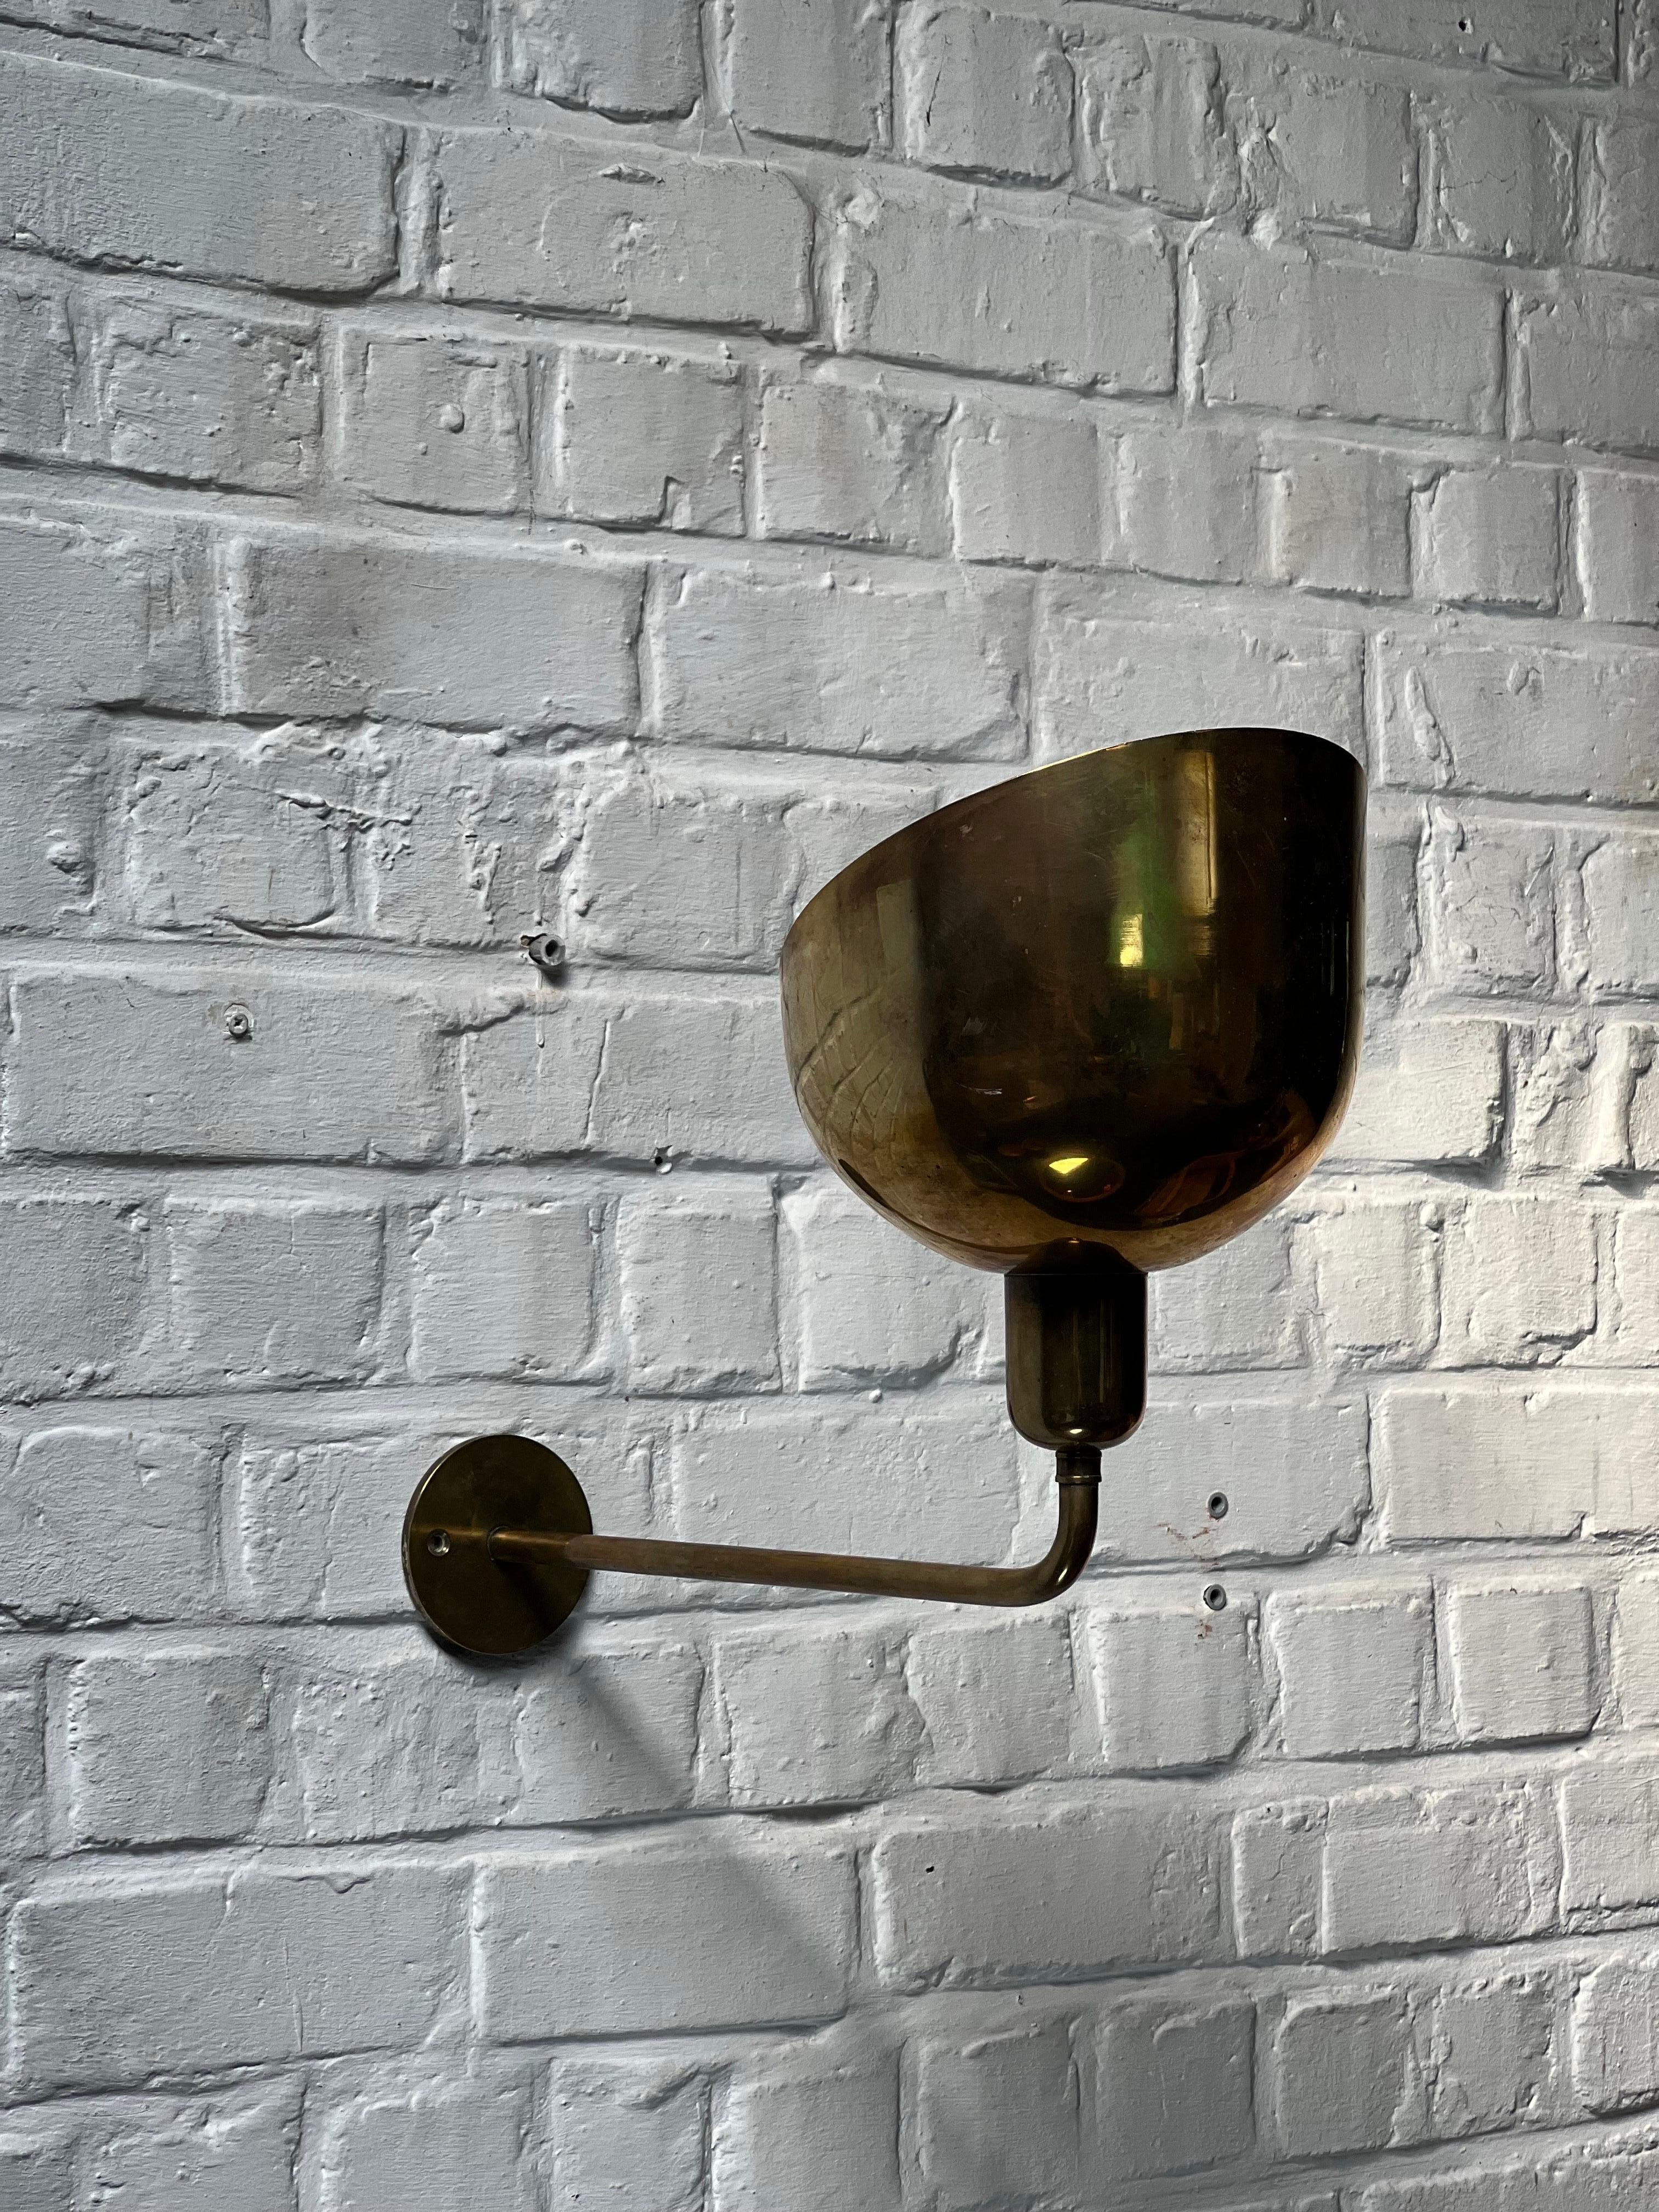 One of most influant Danish architect of the early 1900. Brass wall lamp that can be used down or ud and even on the side. Large reflector with a long arm. Elegant, minimal and classical at the same time. A true master piece produced by lighting